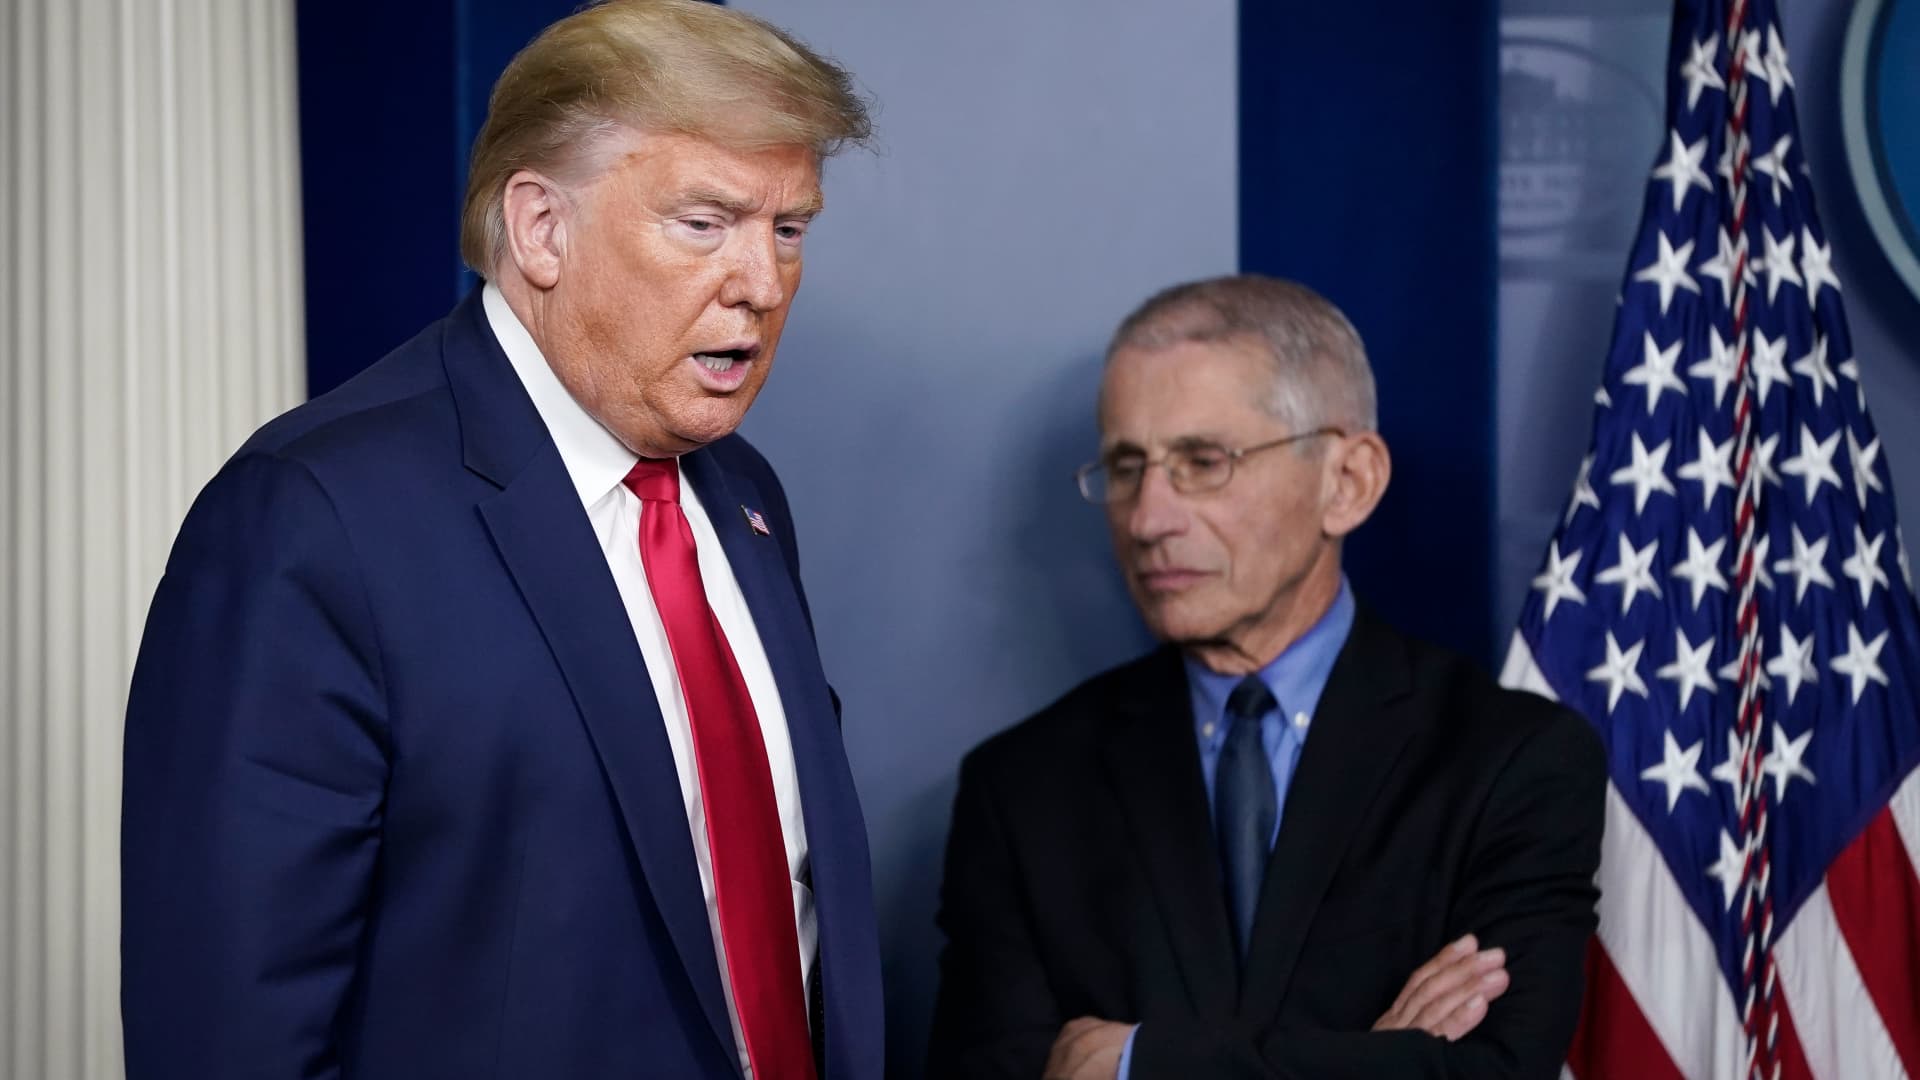 (L-R) U.S. President Donald Trump and National Institute of Allergy and Infectious Diseases Director Anthony Fauci arrive for a briefing on the coronavirus pandemic in the press briefing room of the White House on March 26, 2020 in Washington, DC.